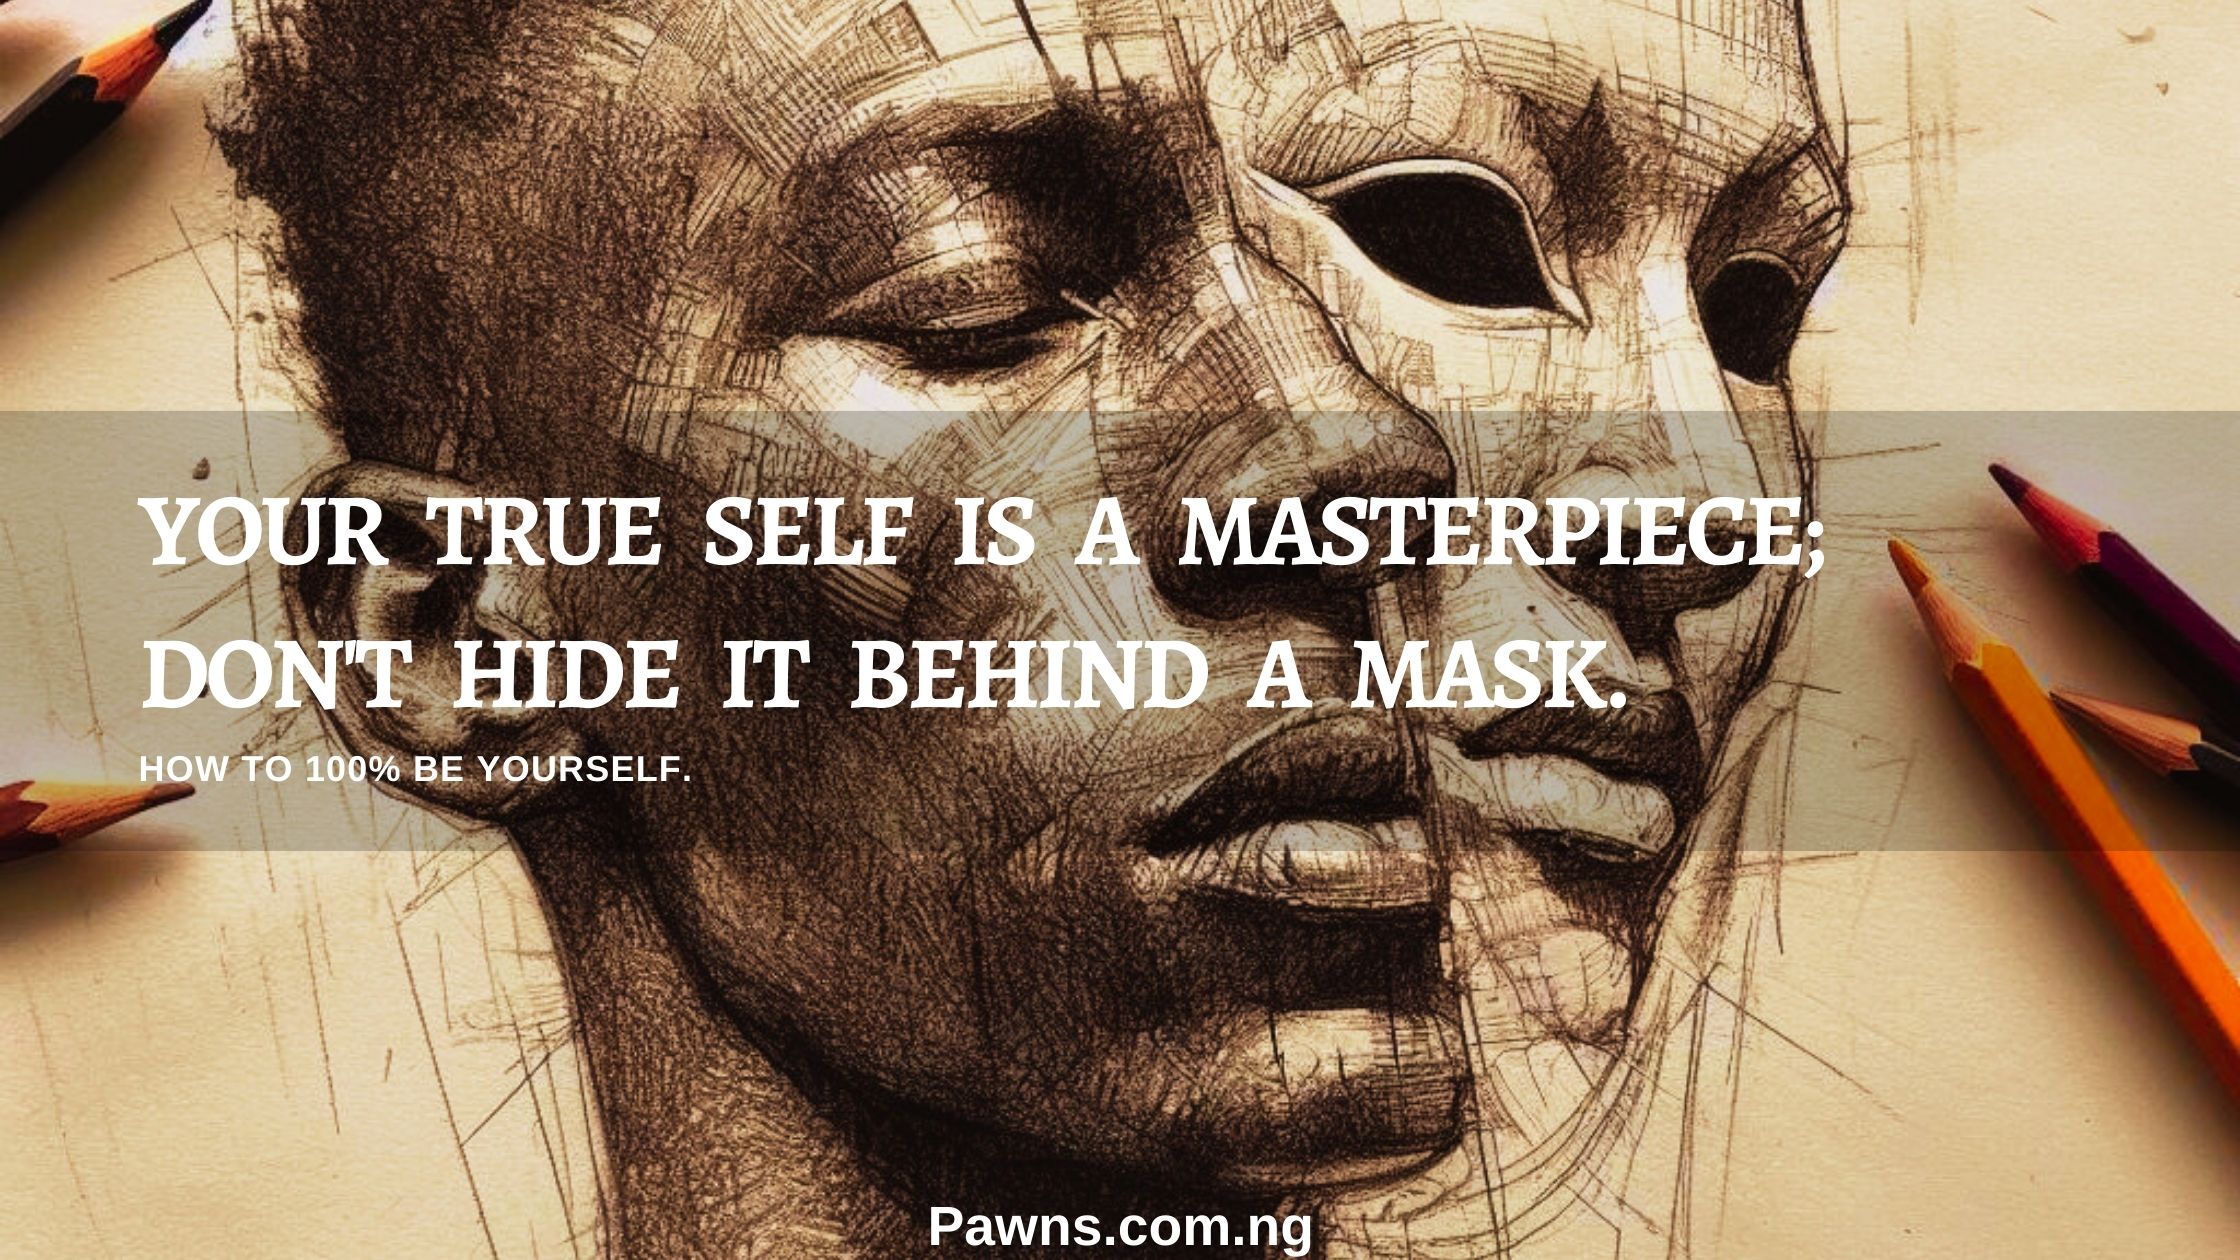 Your true self is a masterpiece; don't hide it behind a mask. How To 100% Be Yourself.